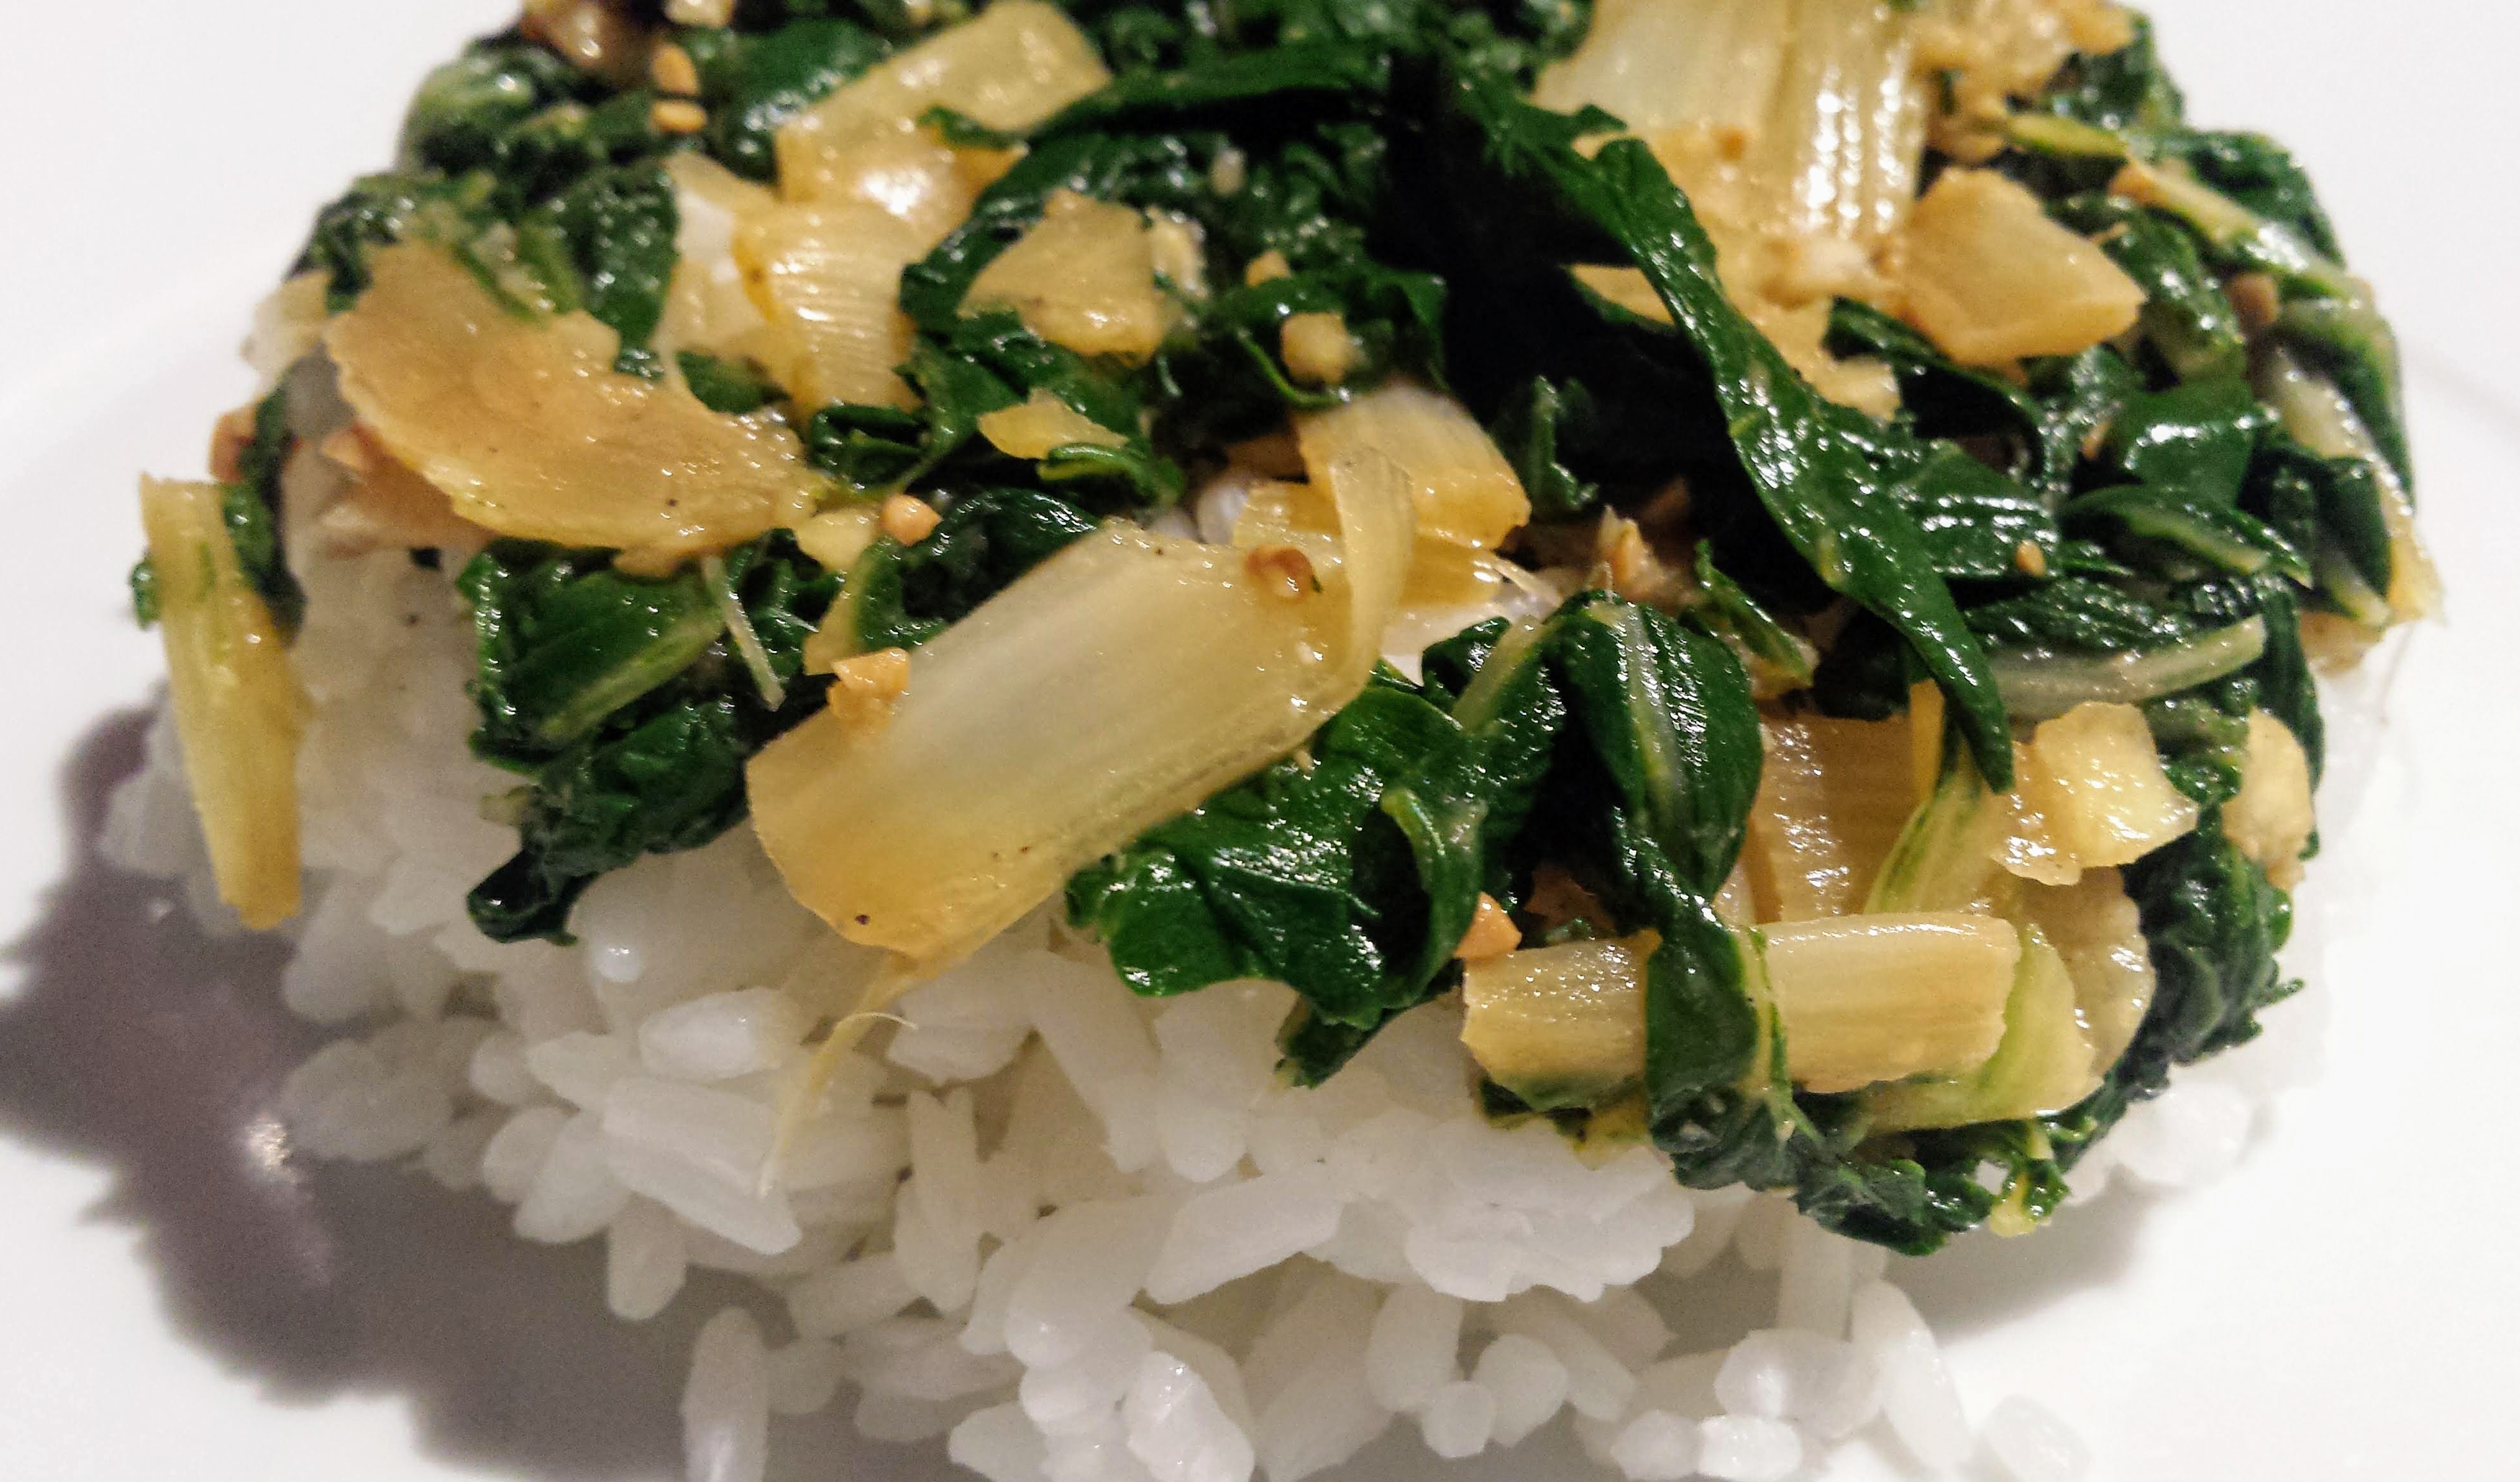 Silverbeet(Chard) recipe 2. Quick and easy Miso silverbeet